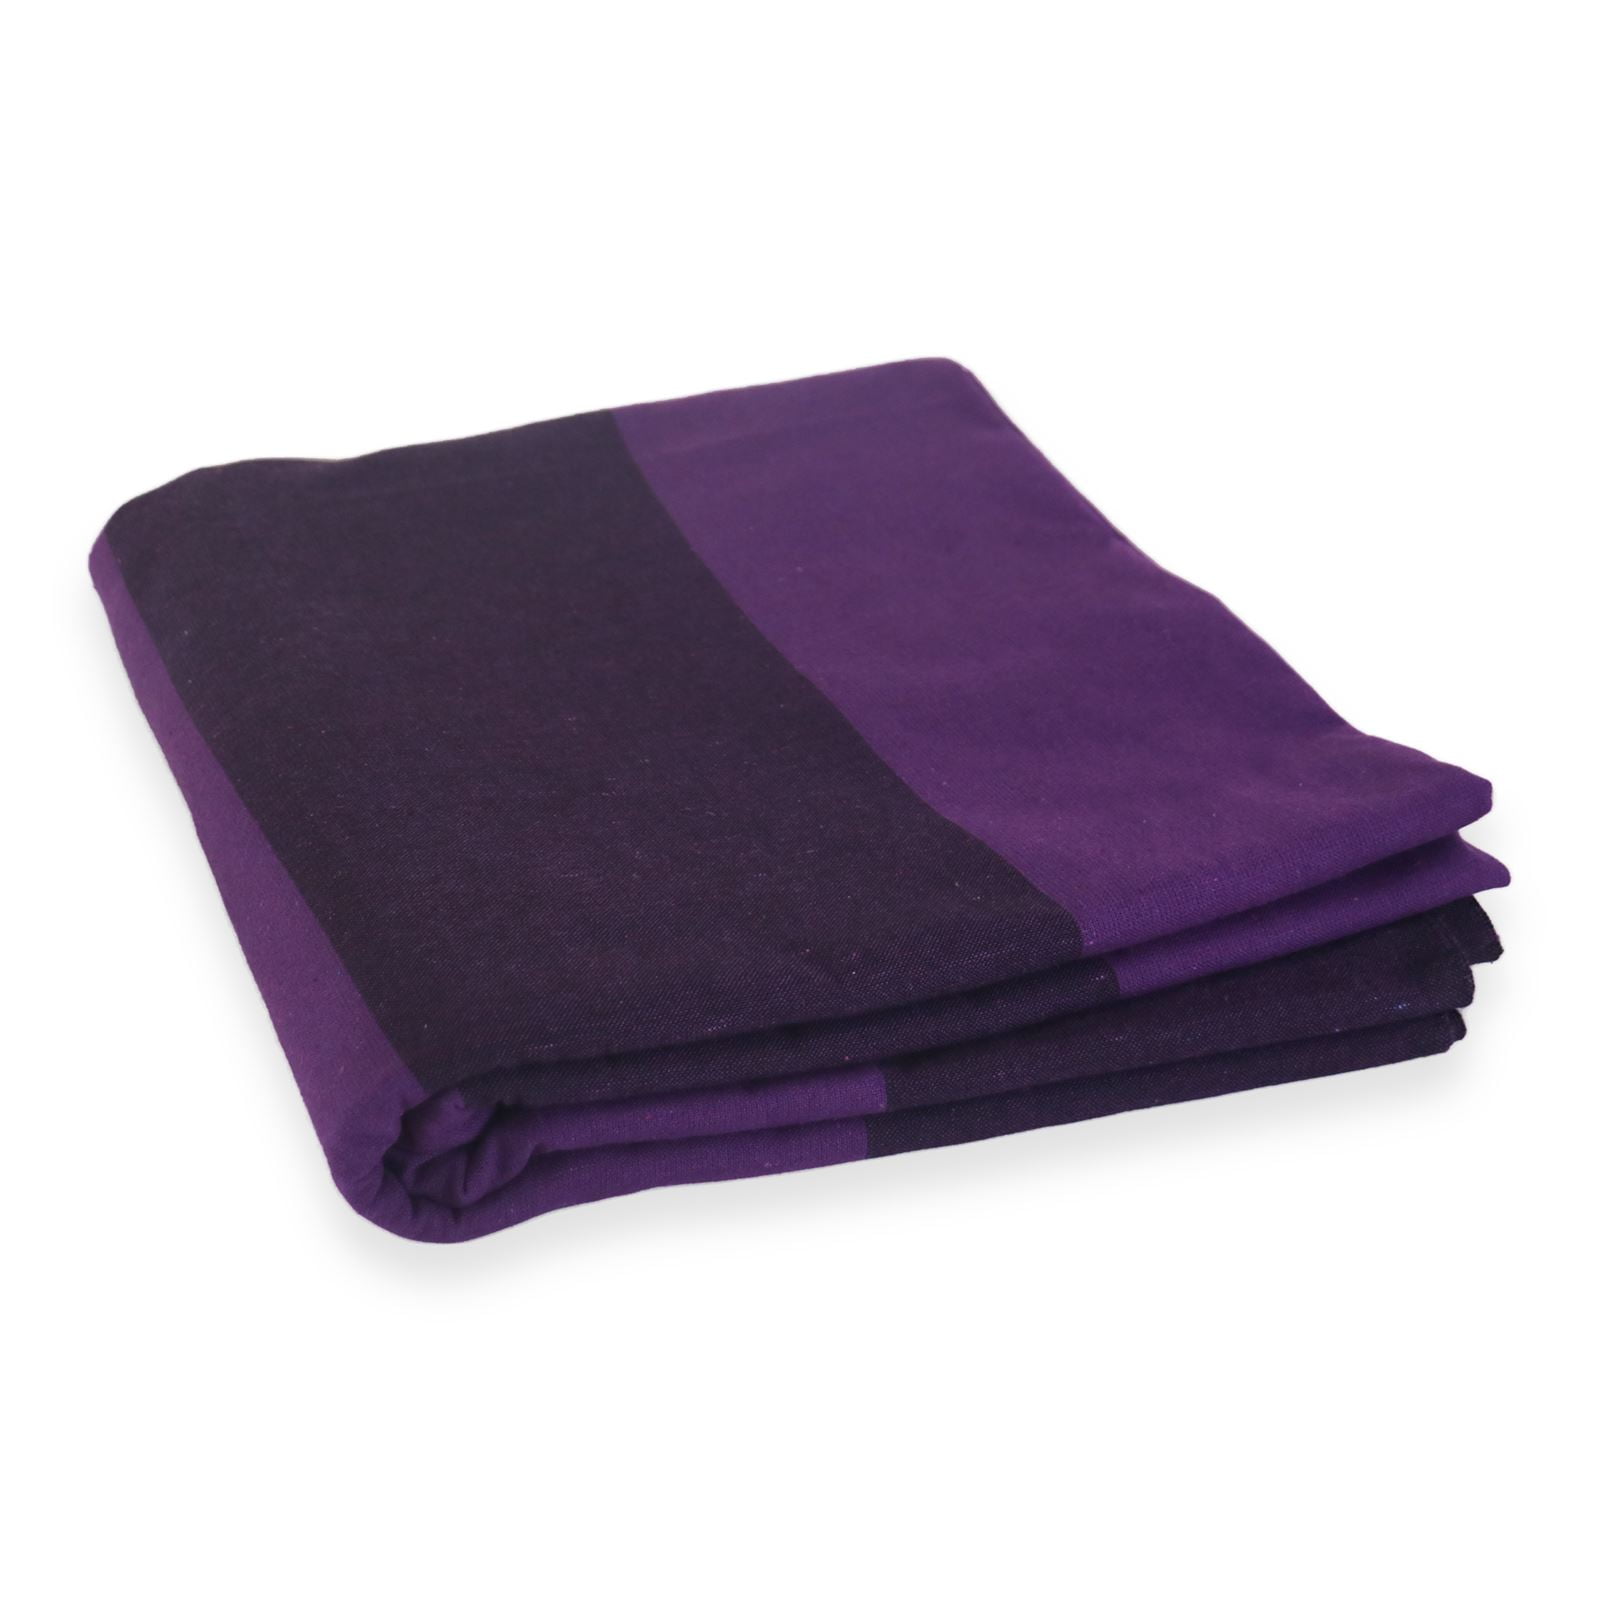 100 x 110 Purple Handloom Cotton Bed Sheets for King, Queen, Super King, California King Beds